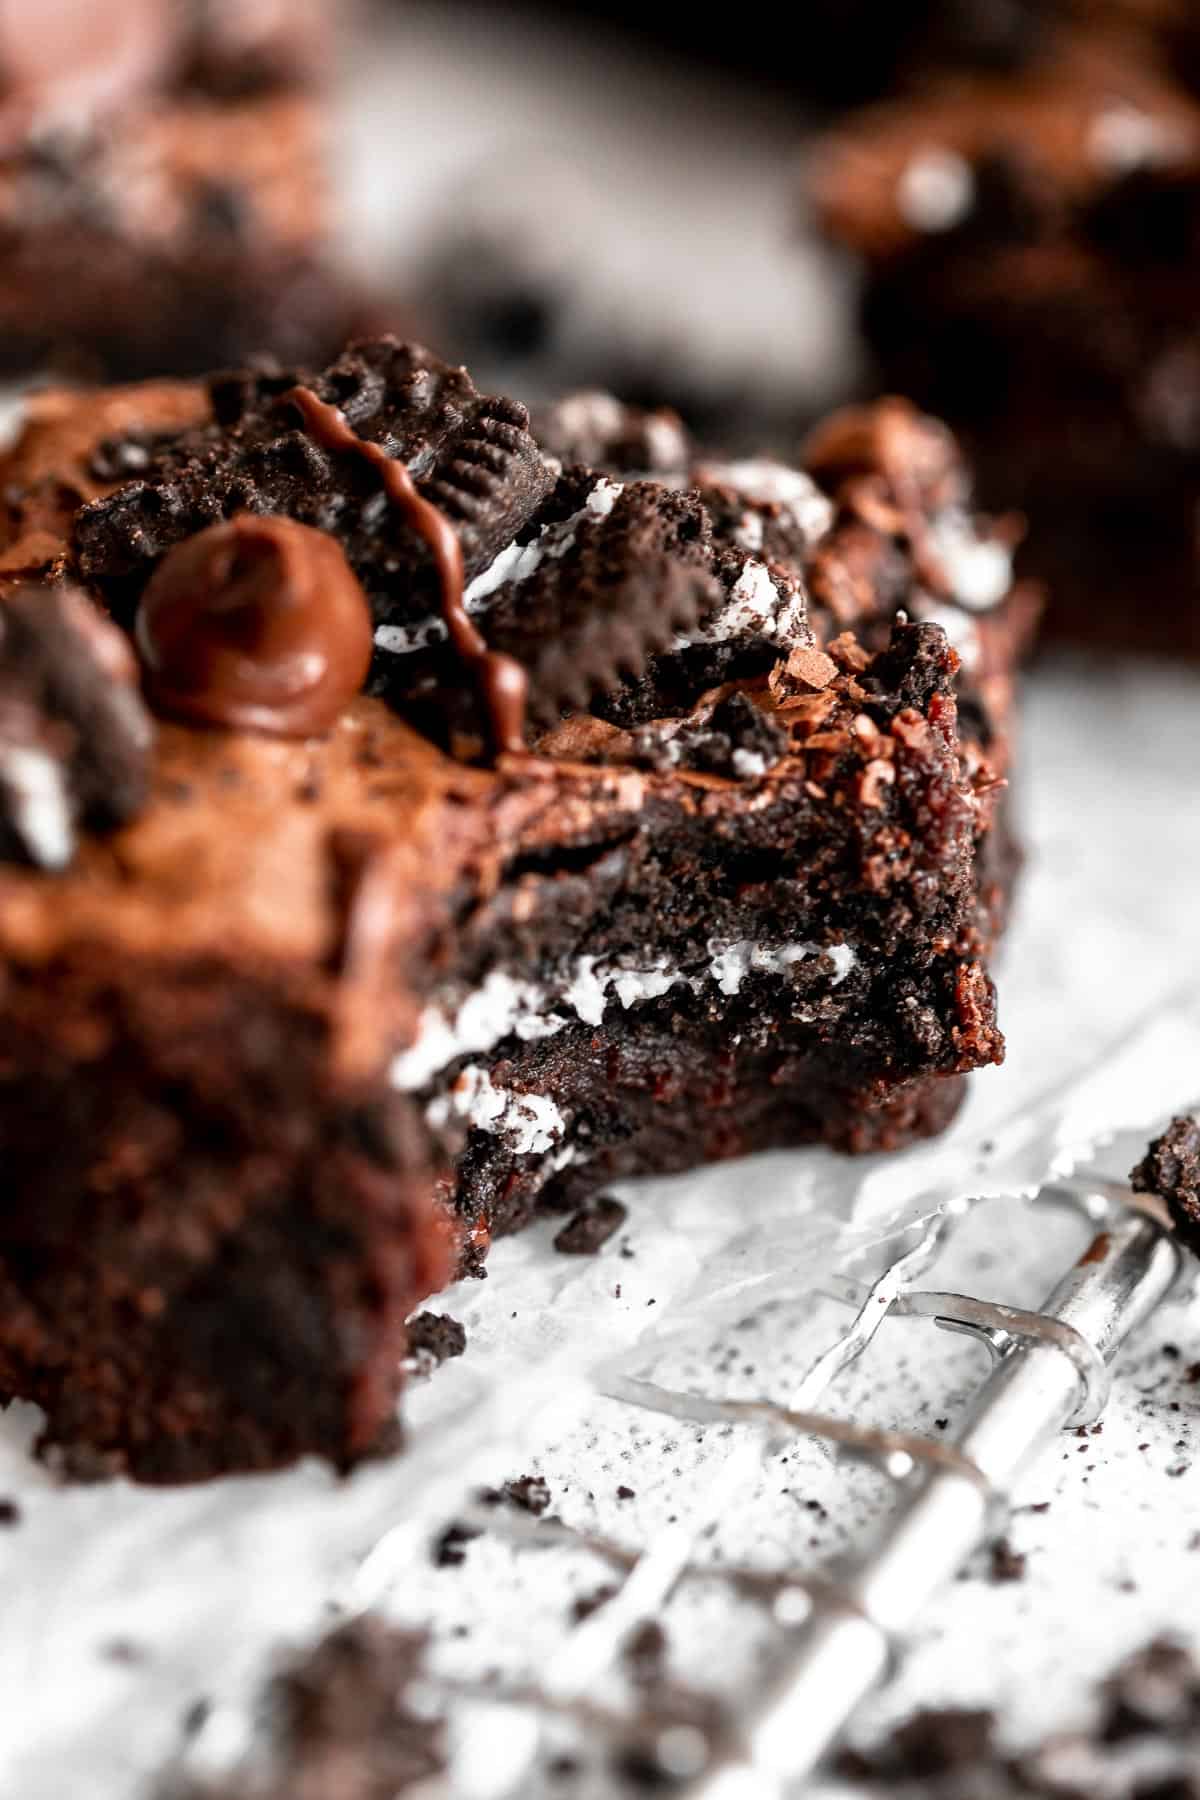 up close image of one gluten free brownie with a bite taken out to show the center oreo